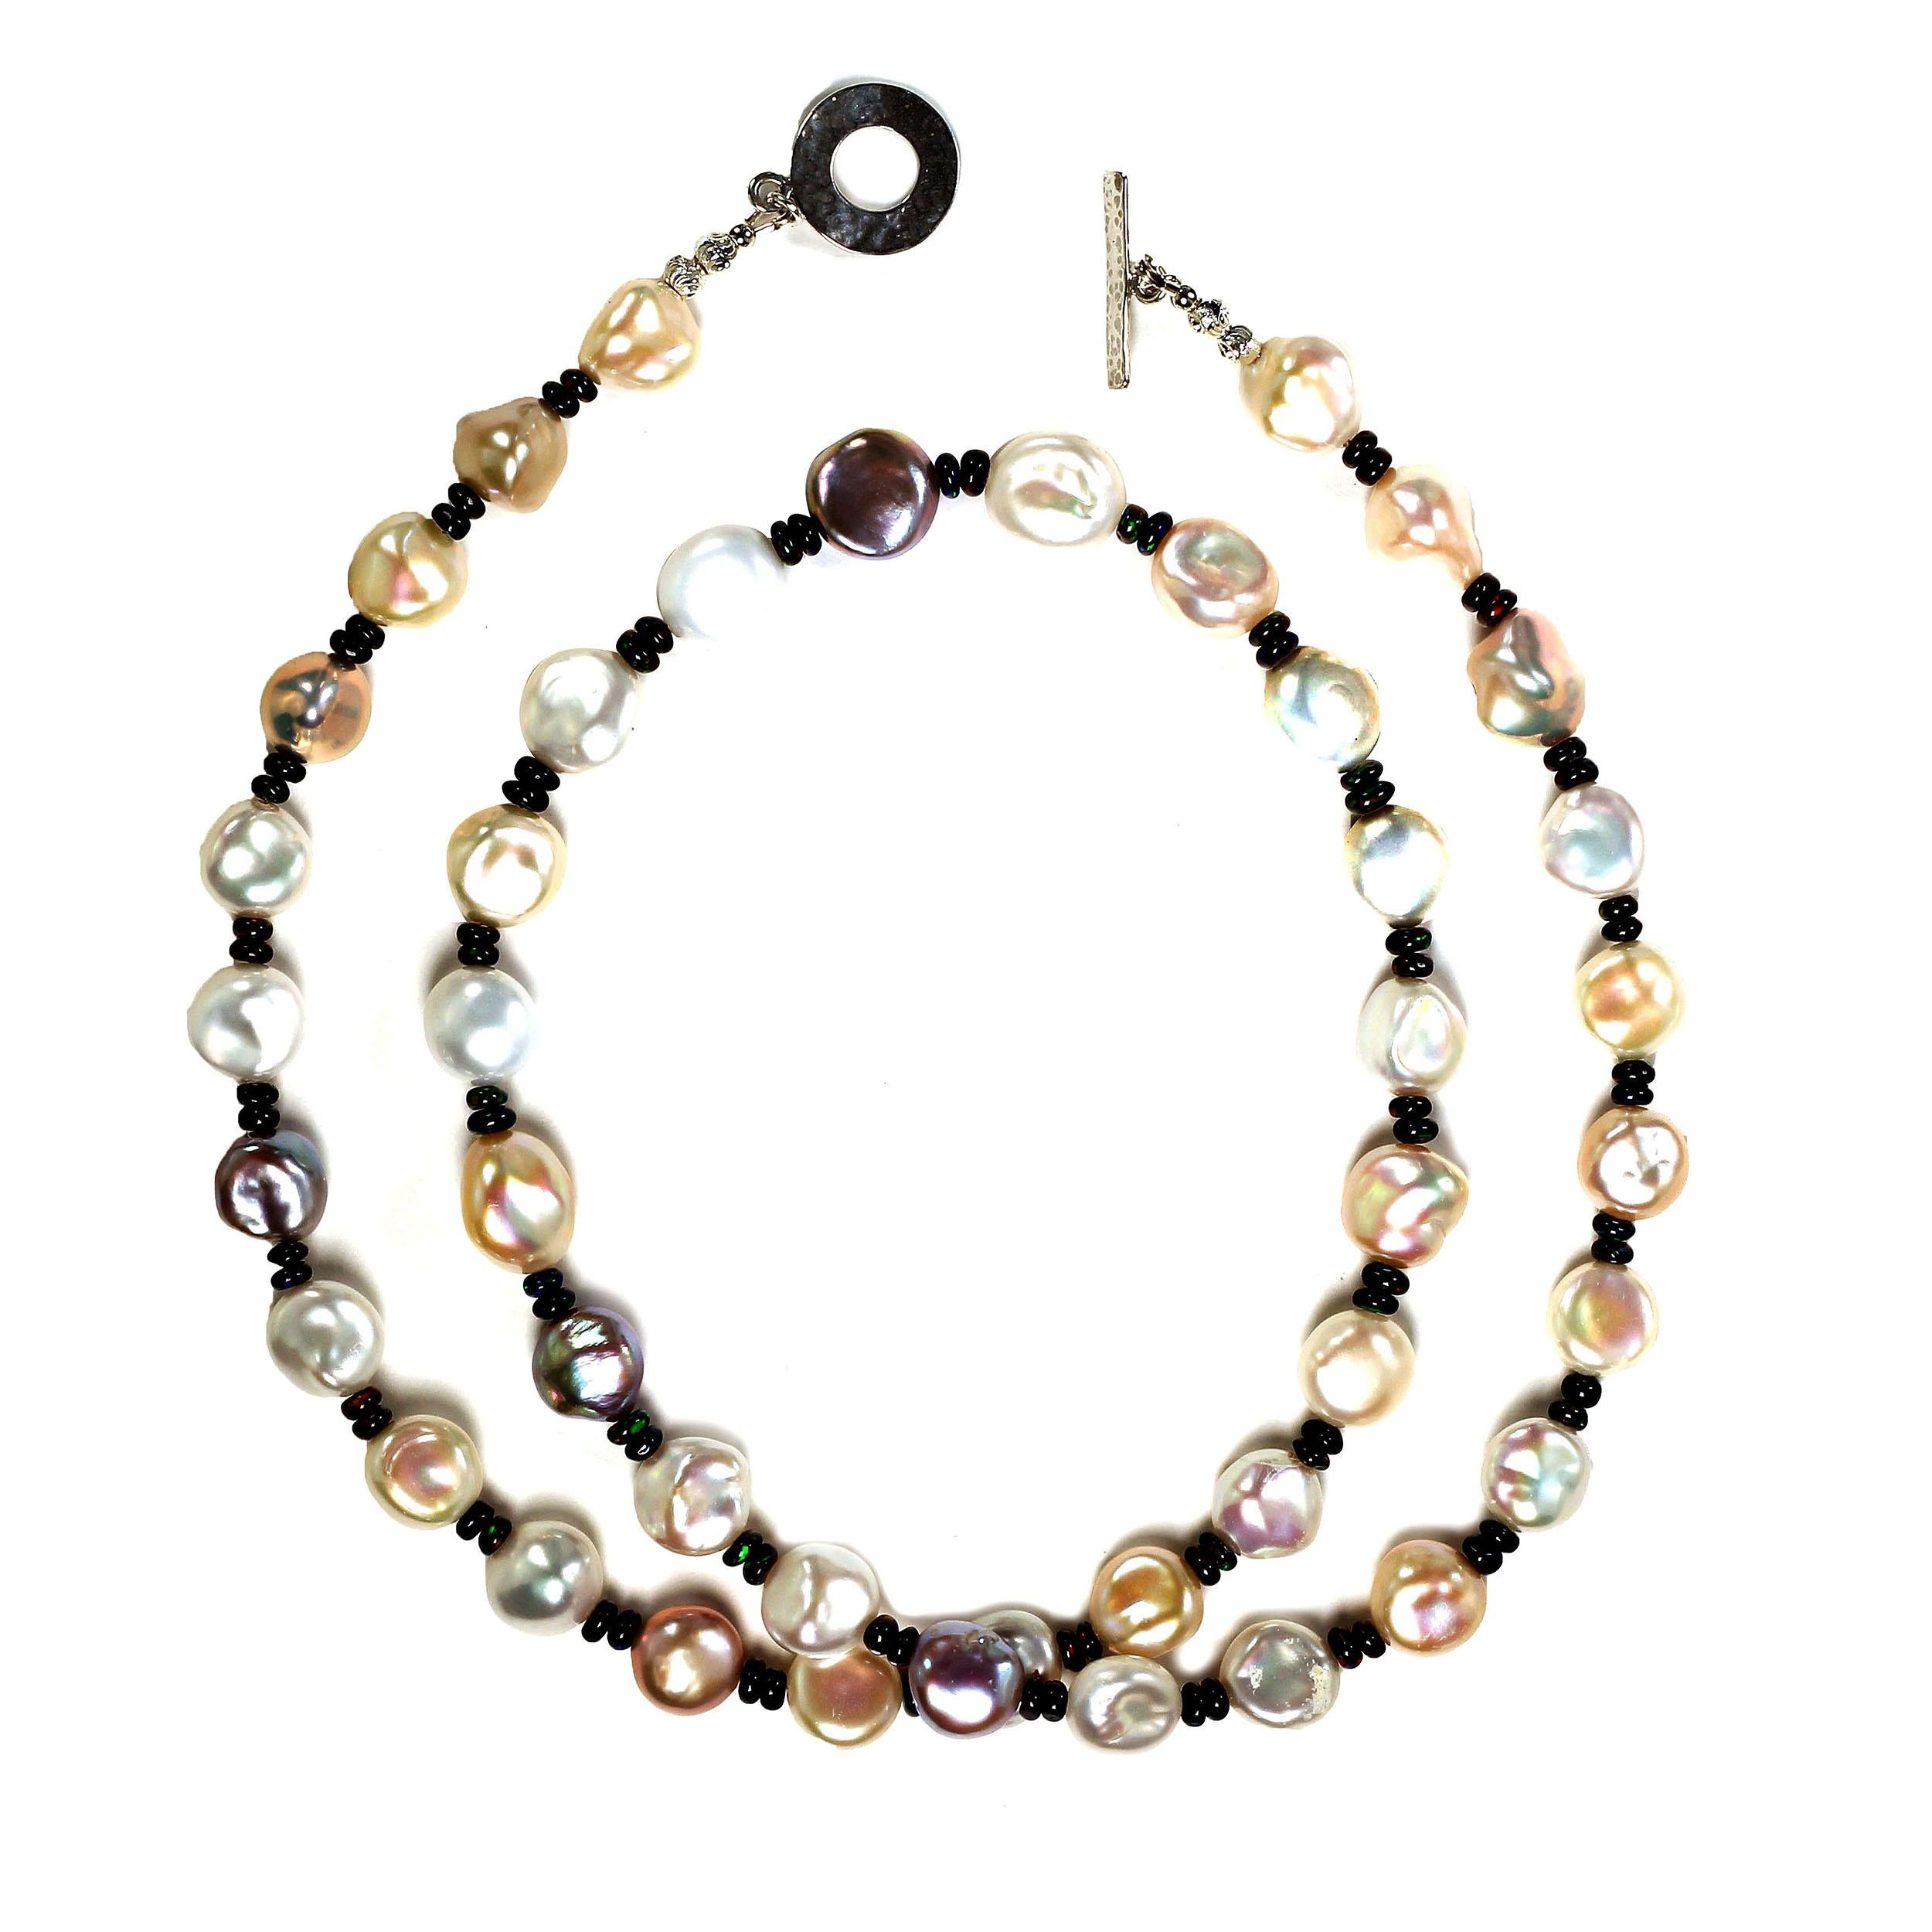 Glowing, Freshwater Pearl Necklace with Black Opal Accents 4